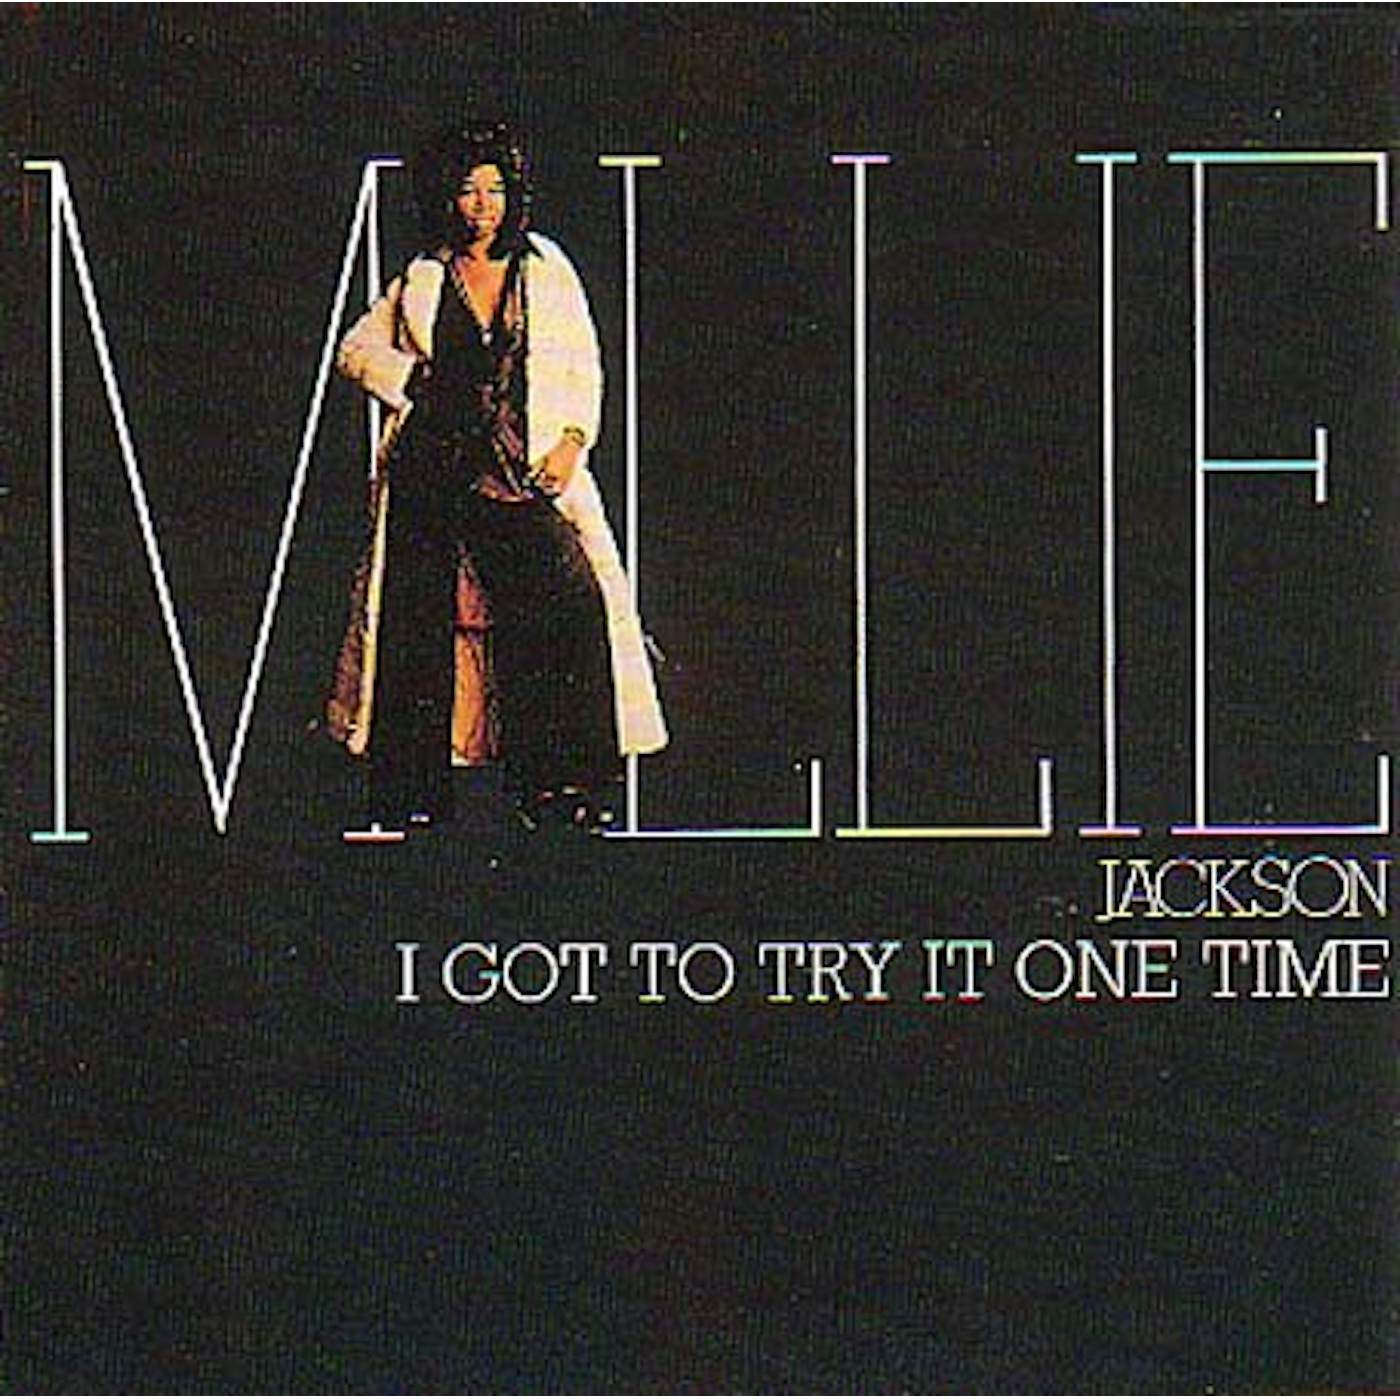 Millie Jackson I GOT TO TRY IT ONE MORE TIME CD